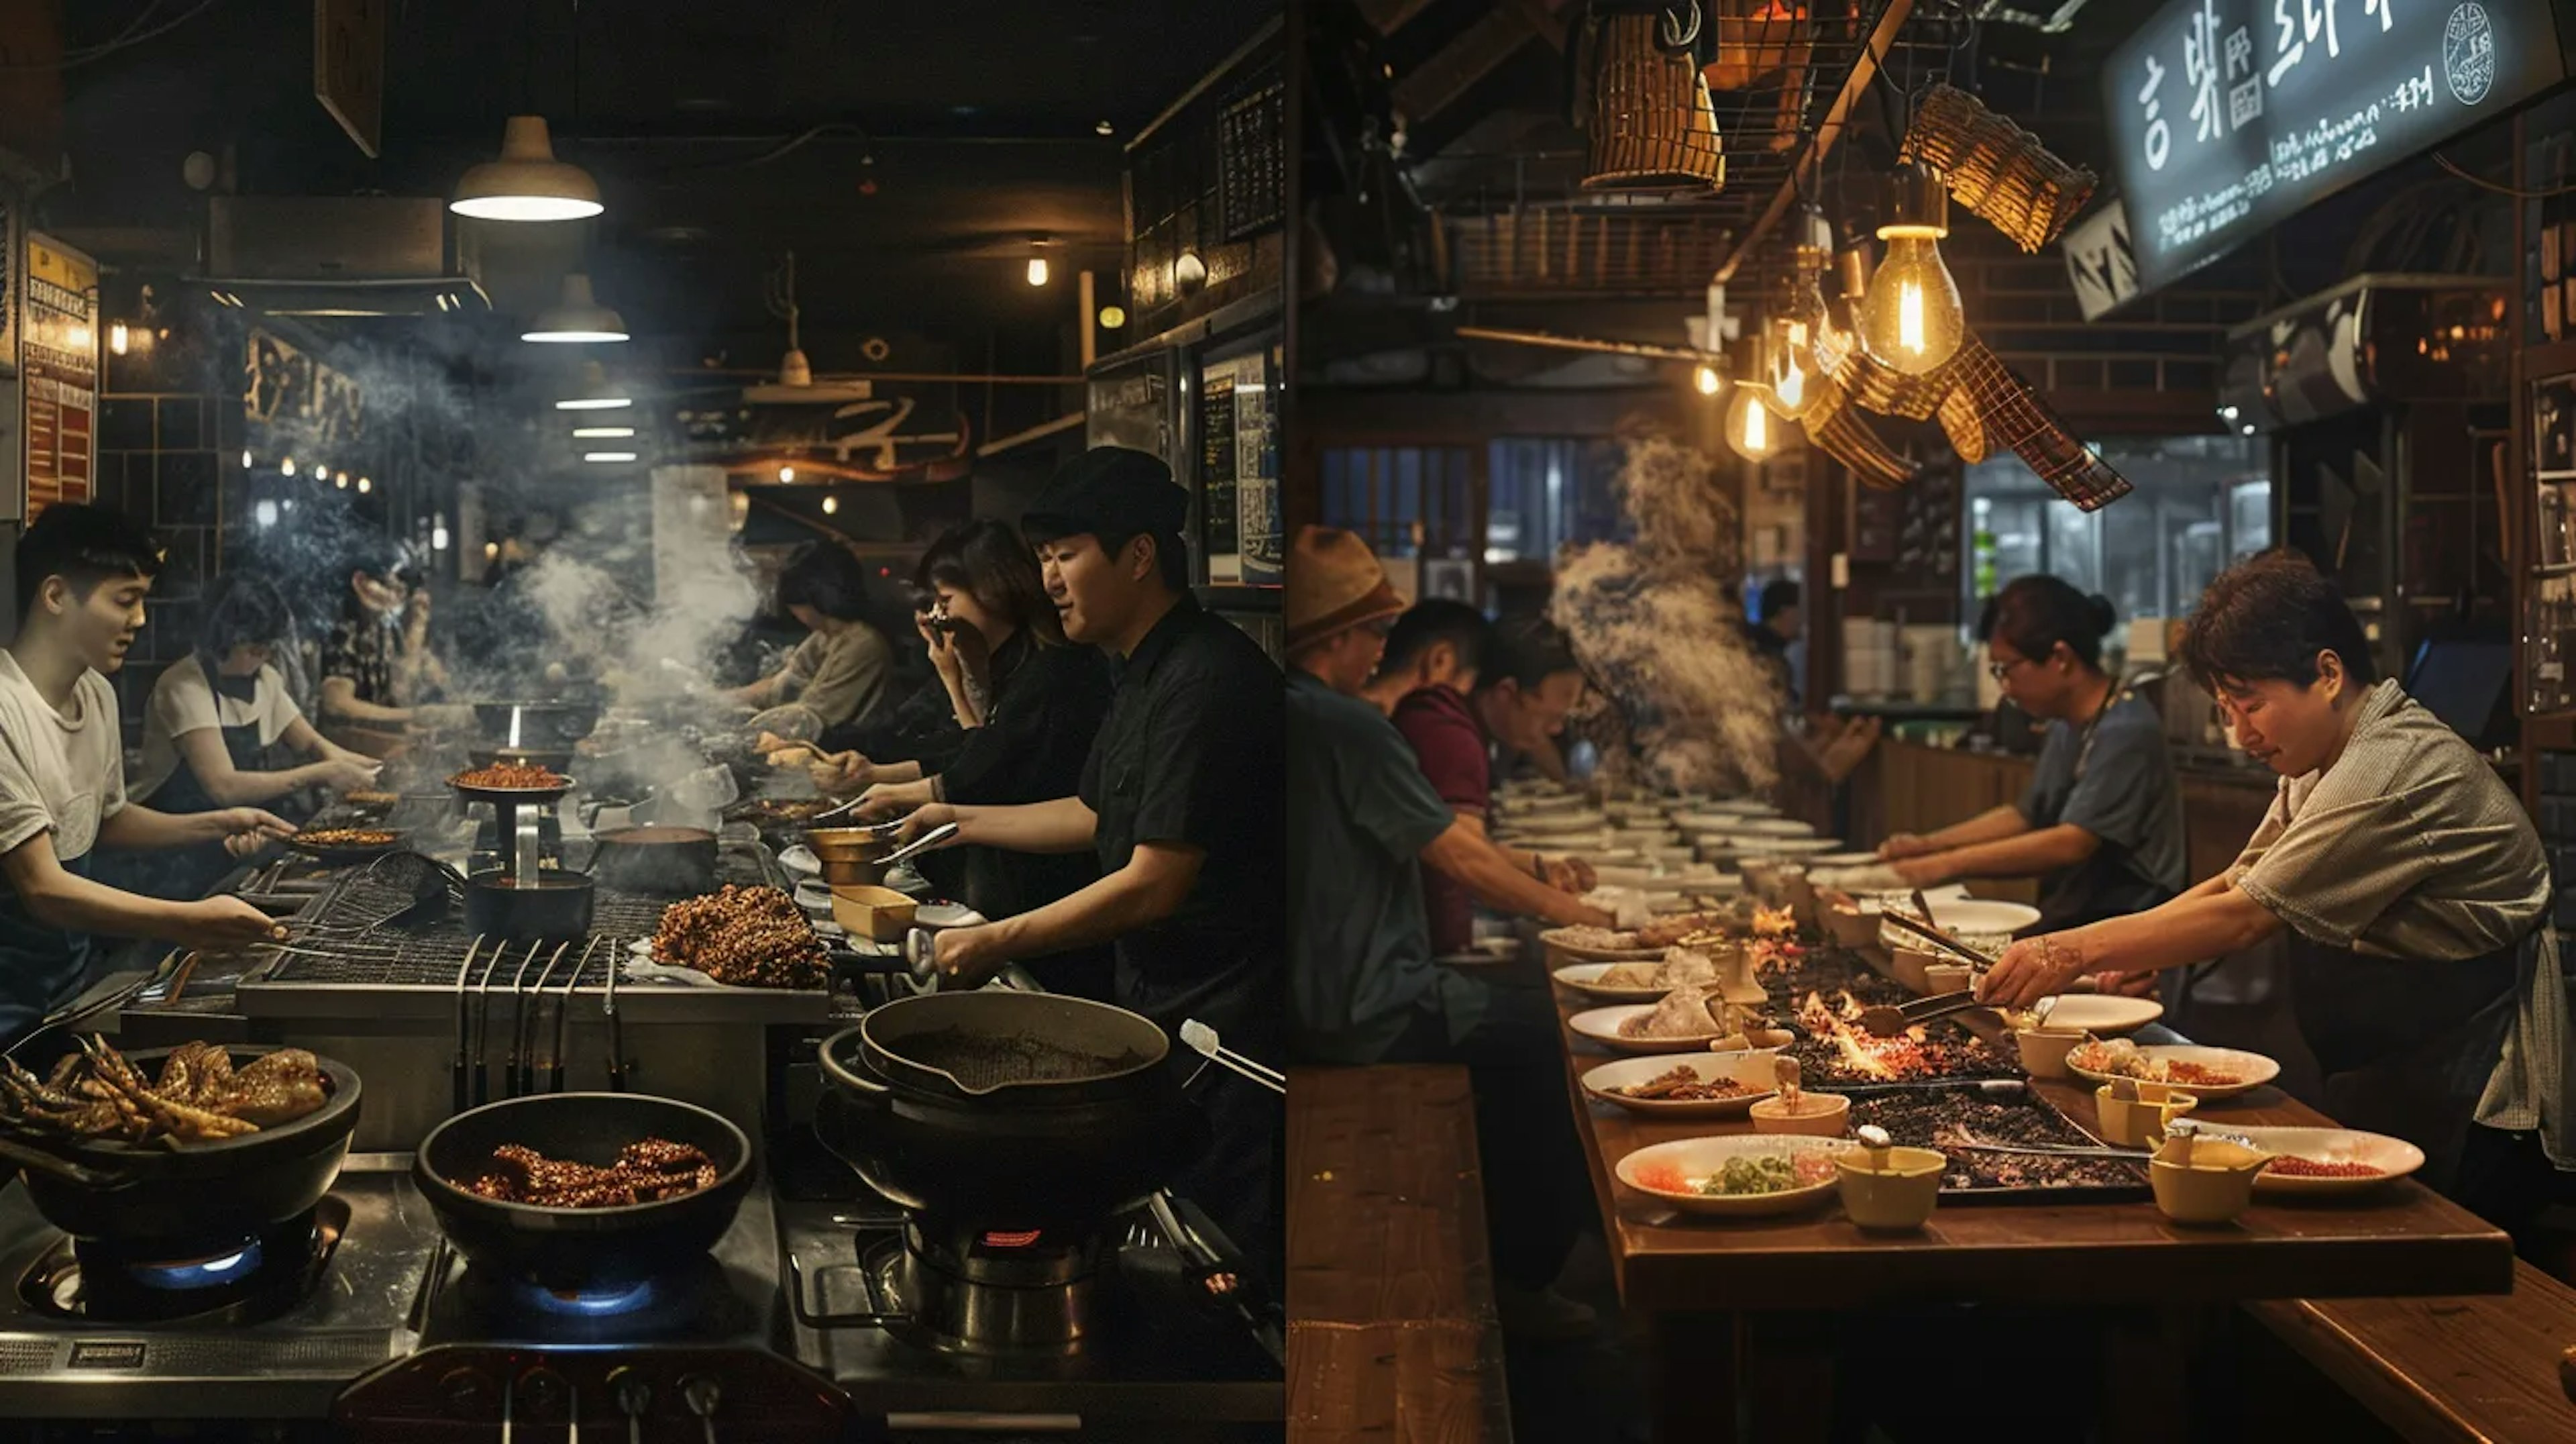 Contrasting dining experiences at a lively Korean BBQ and a focused Yakiniku restaurant, emphasizing the different cultural and social vibes of each grilling style